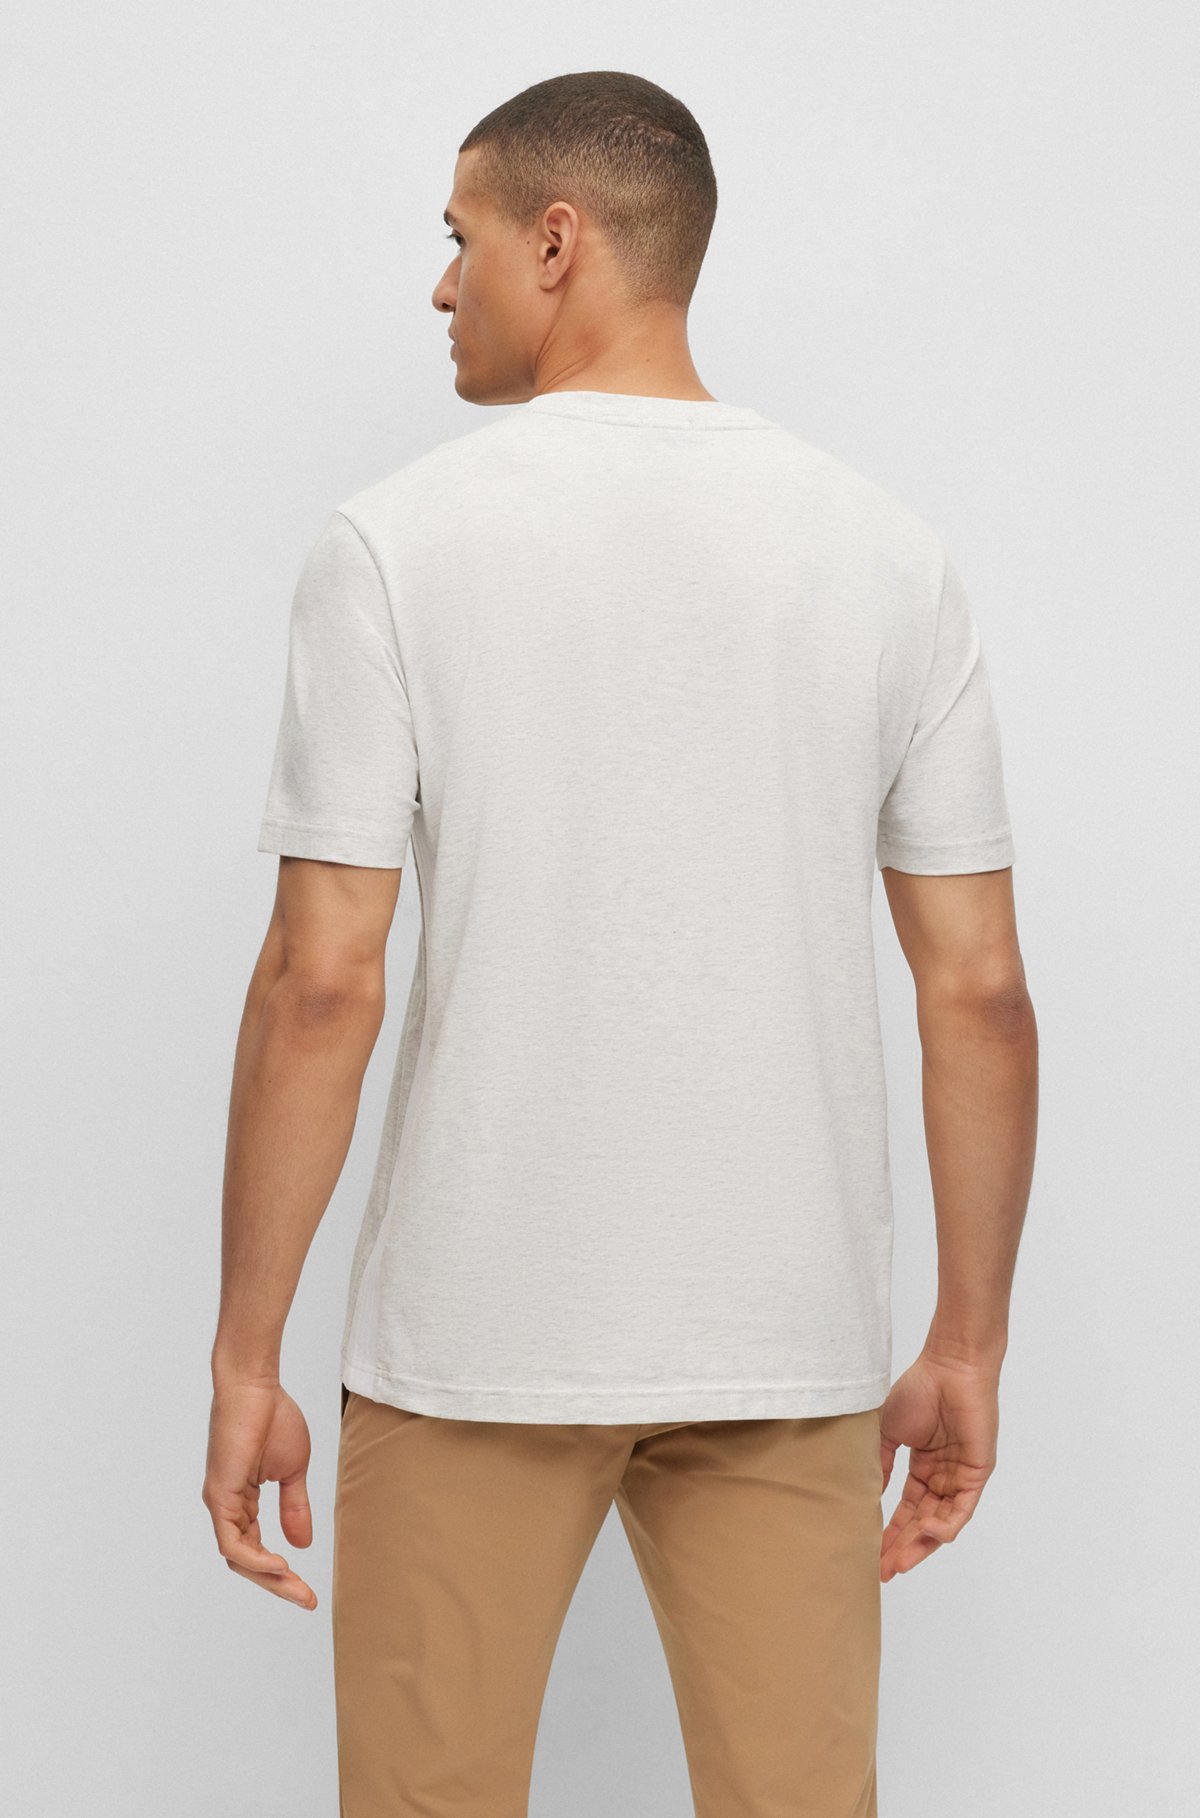 BOSS - Regular-fit T-shirt in stretch cotton with side tape